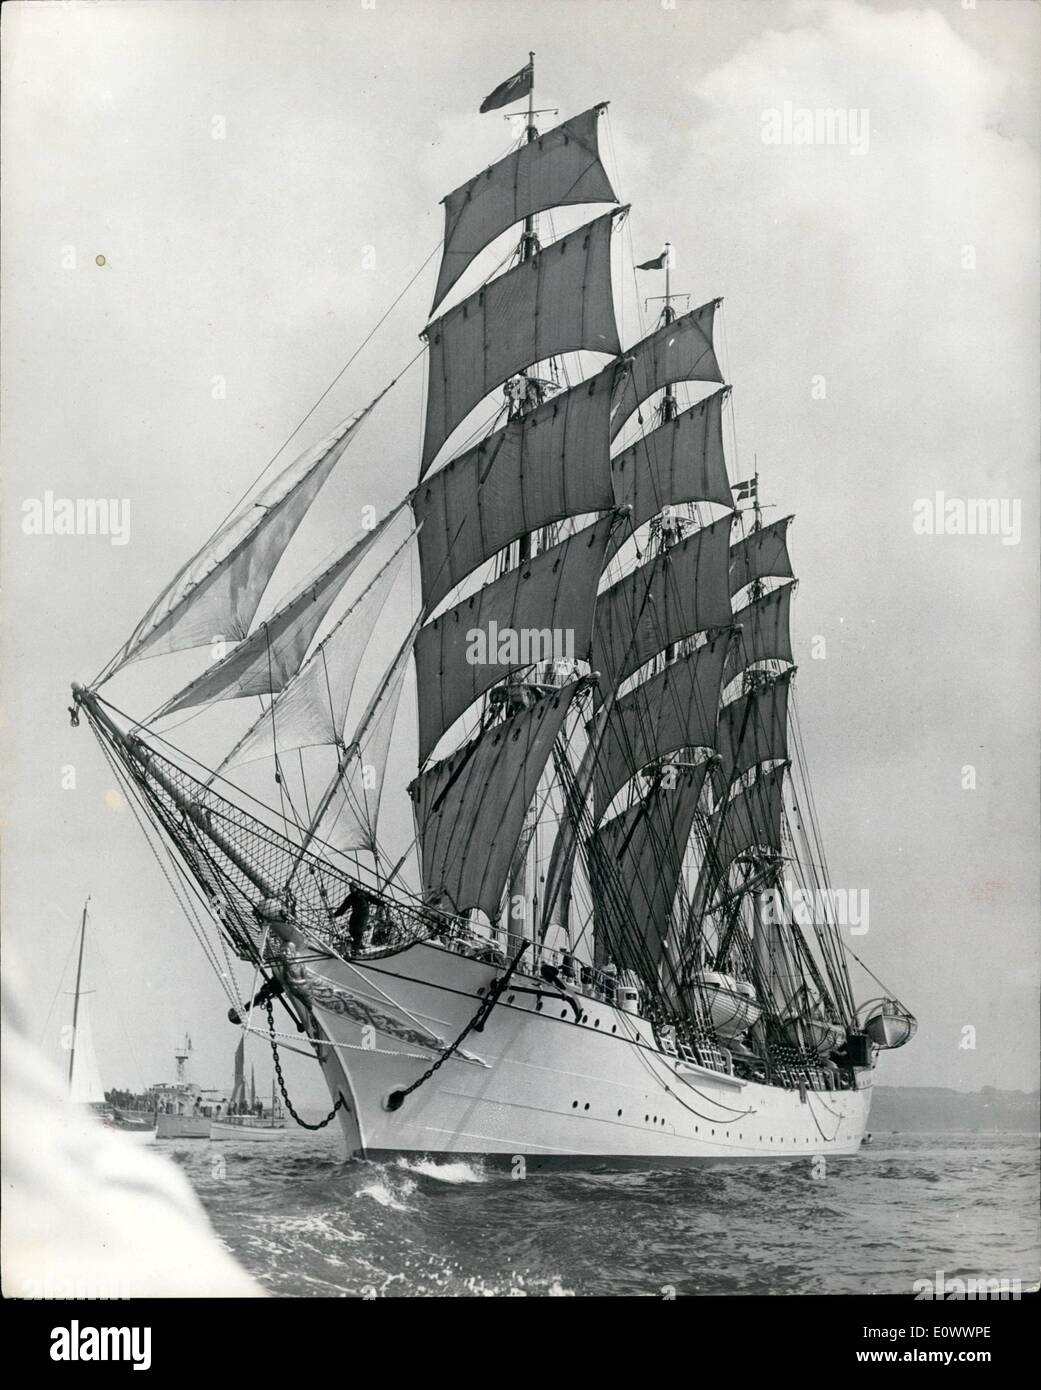 May 05, 1964 - ''Tall Ships: At Plymouth.: For the fast few days, glorious sights of the past have been seen in Plymouth sound as the great sailing ships have been assembling for the start of the ''tall ships'' race from Plymouth sound as the great sailing ships have been assembling for the start of the ''Tall Ships'' race from Plymouth to Lisbon to Bermuda, and finally New York for the World's Fair. One of the most picturesque was the giant Danish sail training ship Danmark which will be sailing with the others although not competing in the race Stock Photo